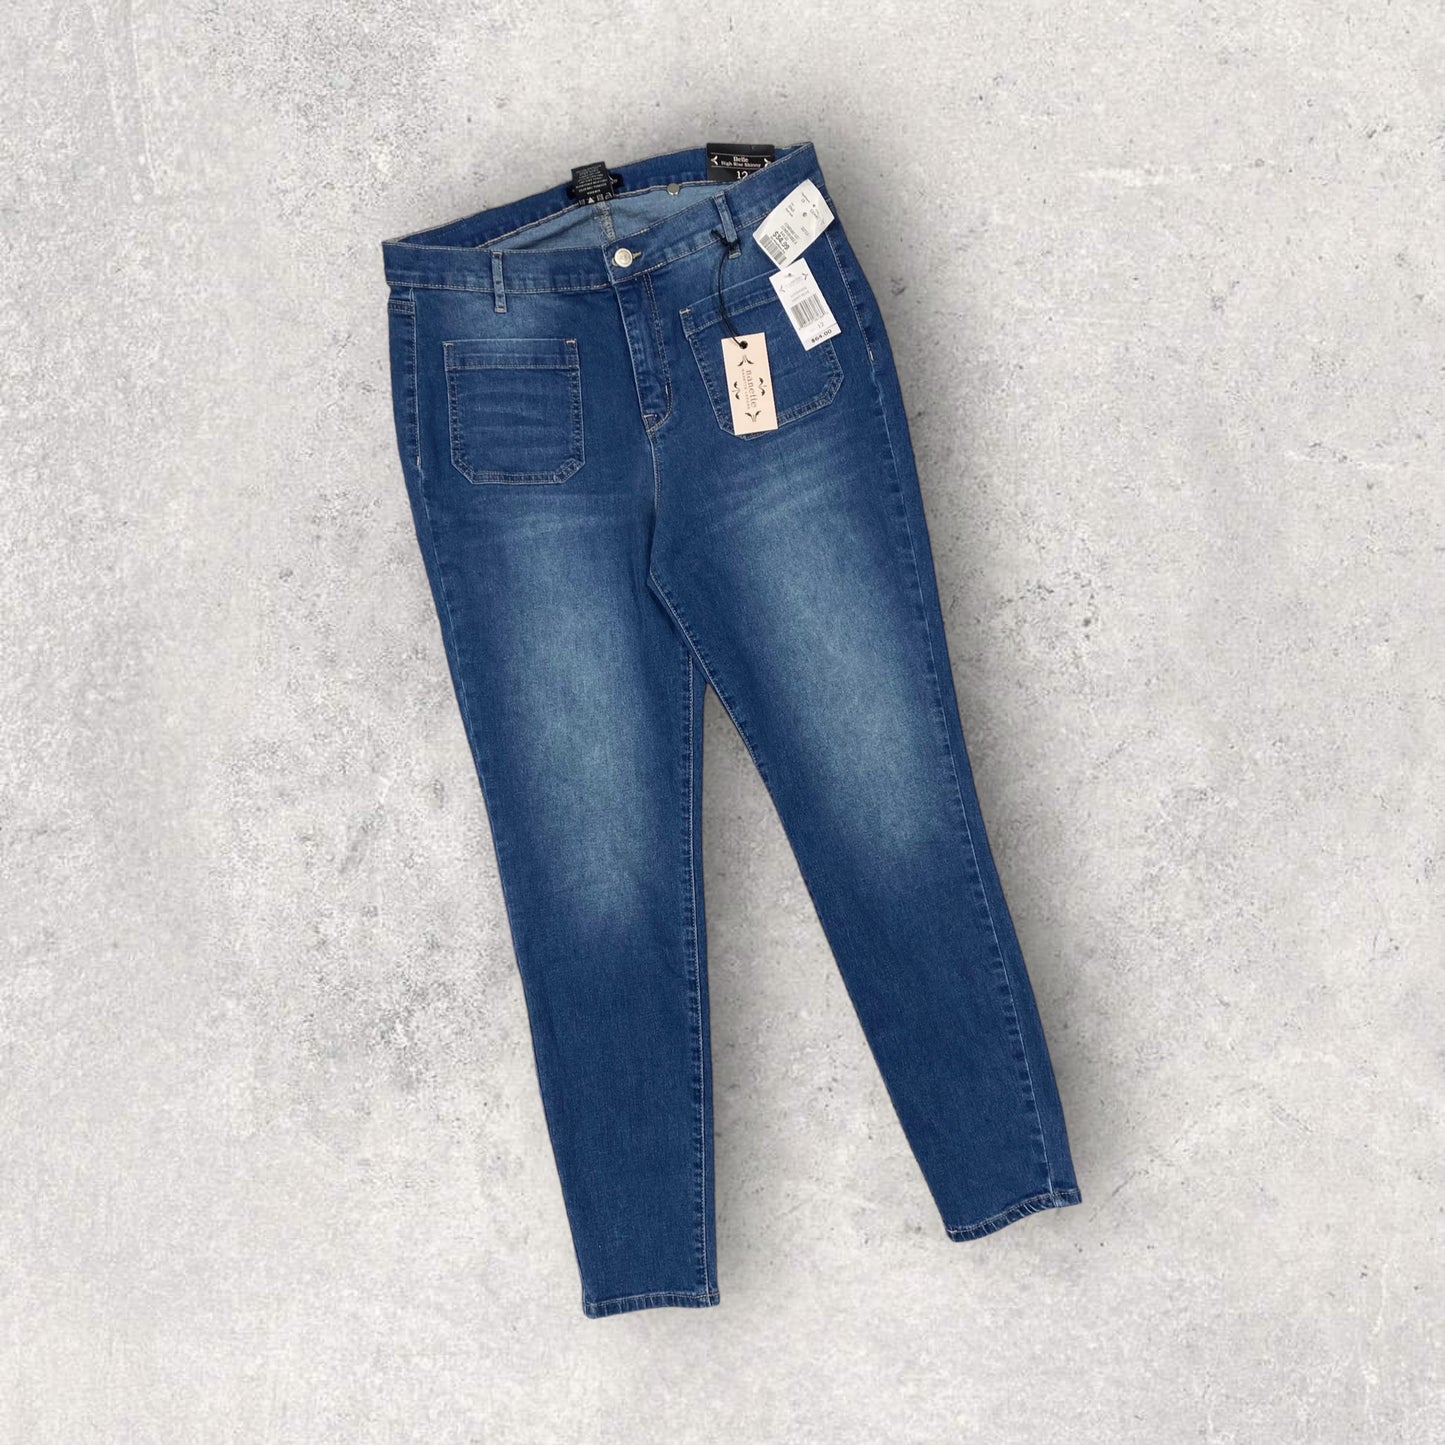 Jeans Skinny By Nanette Lepore  Size: 12